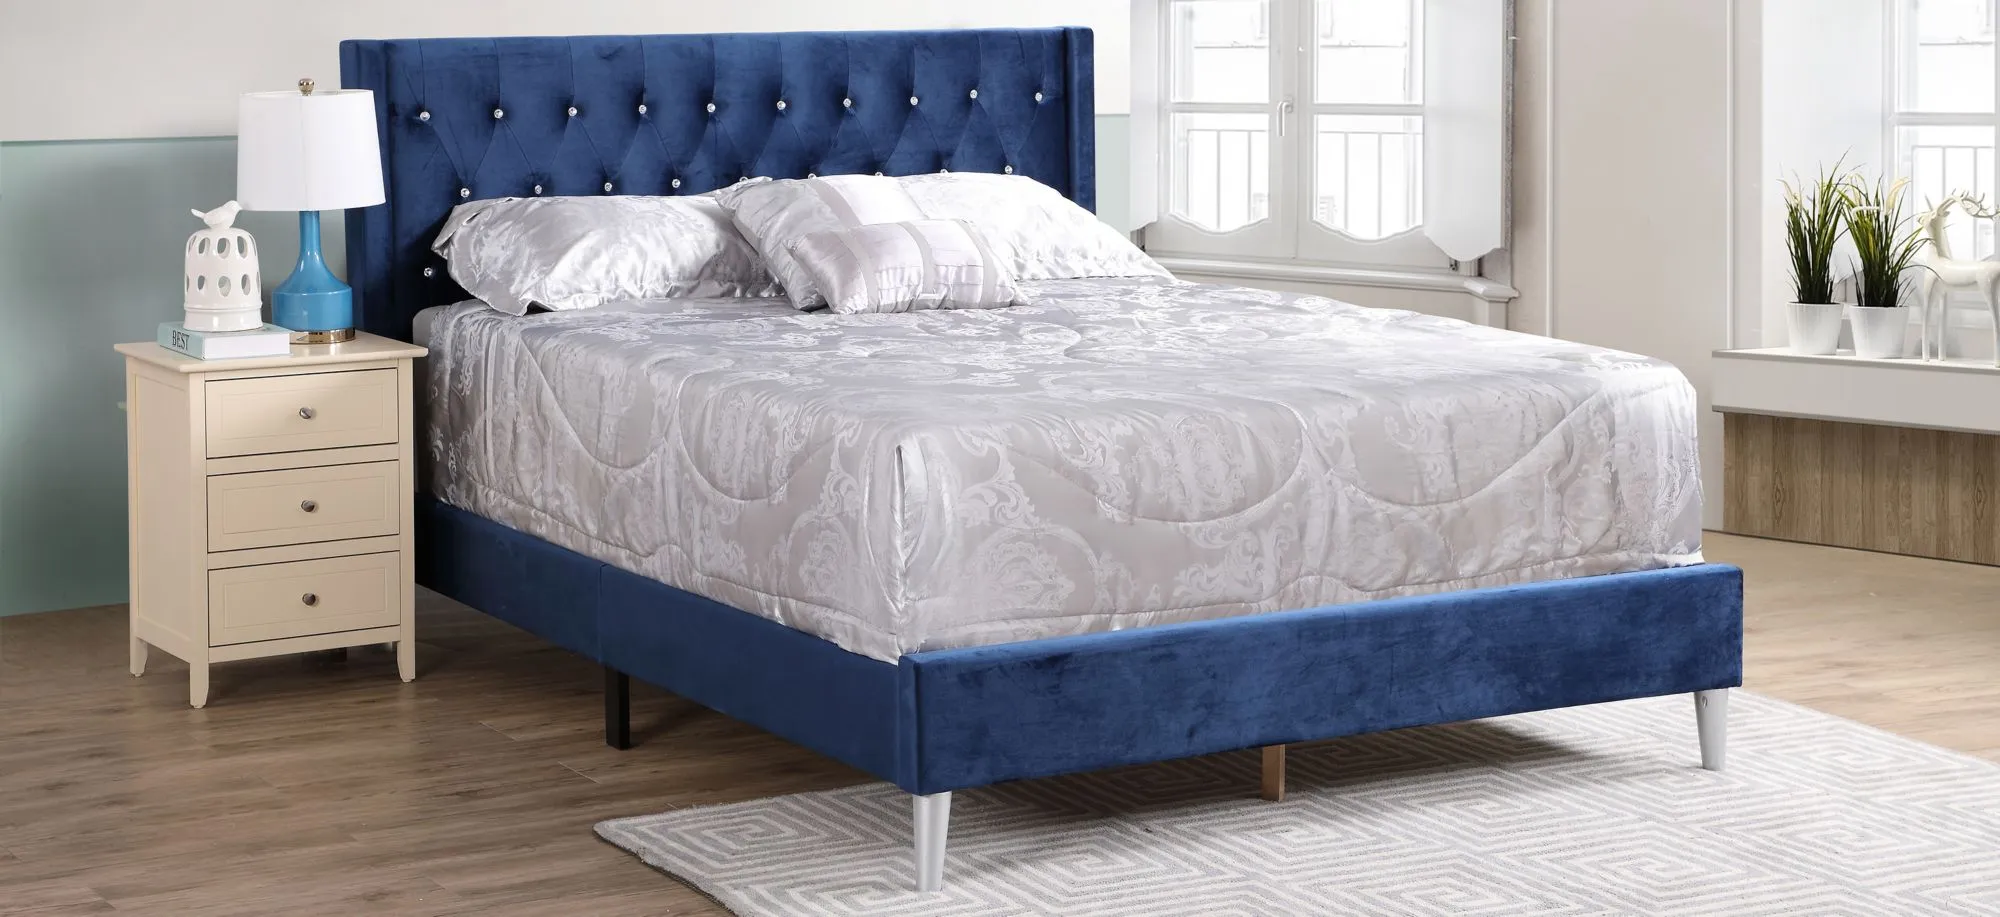 Bergen Upholstered Panel Bed in Navy Blue by Glory Furniture